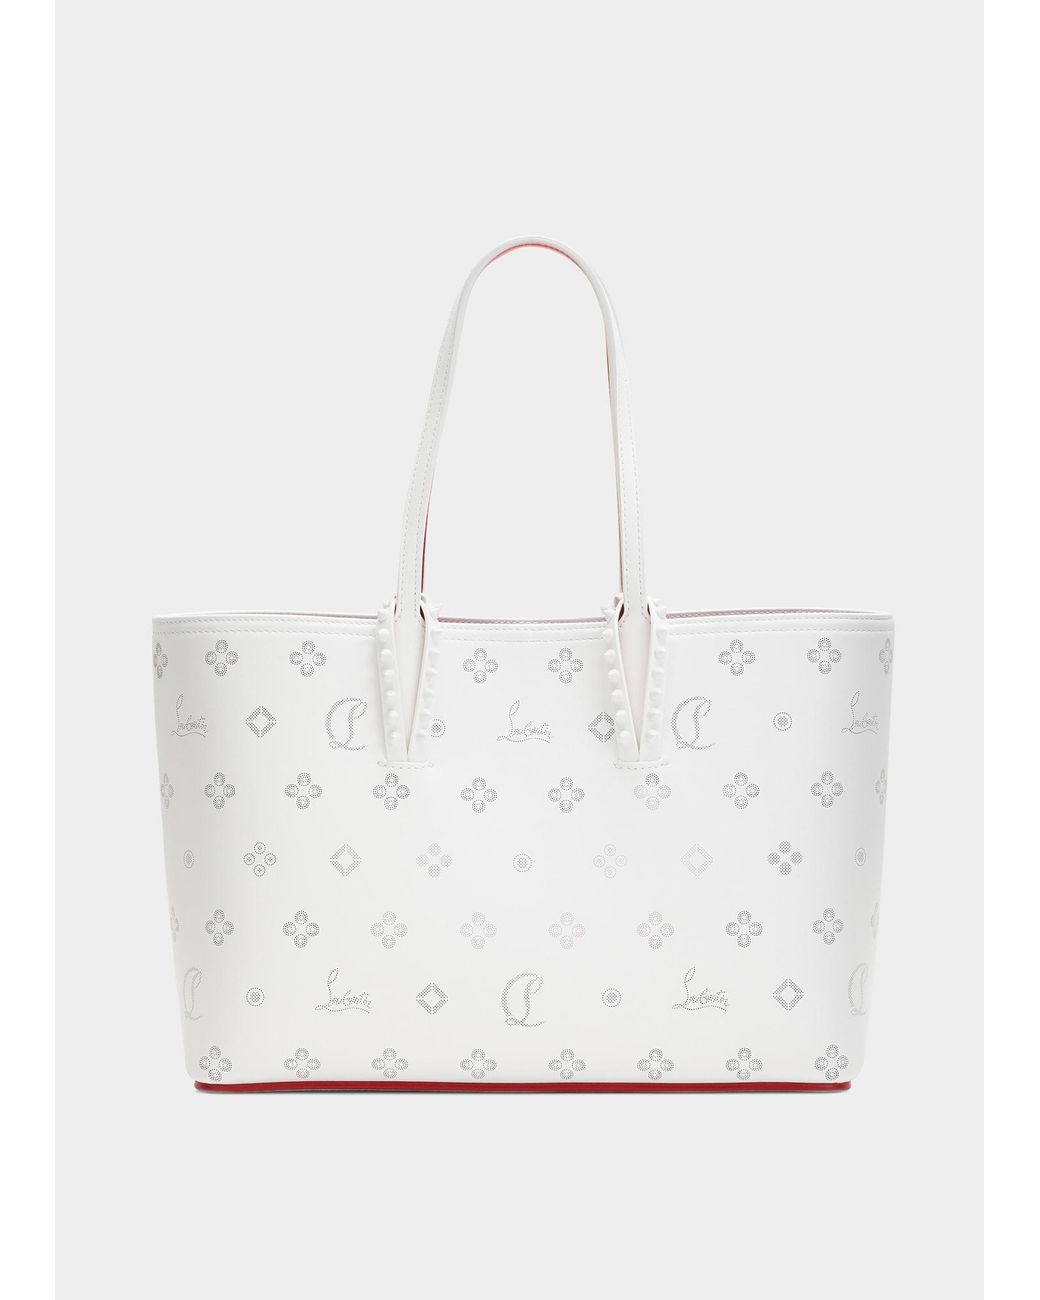 Christian Louboutin Cabata Small Loubinthesky Spike Leather Tote Bag in ...